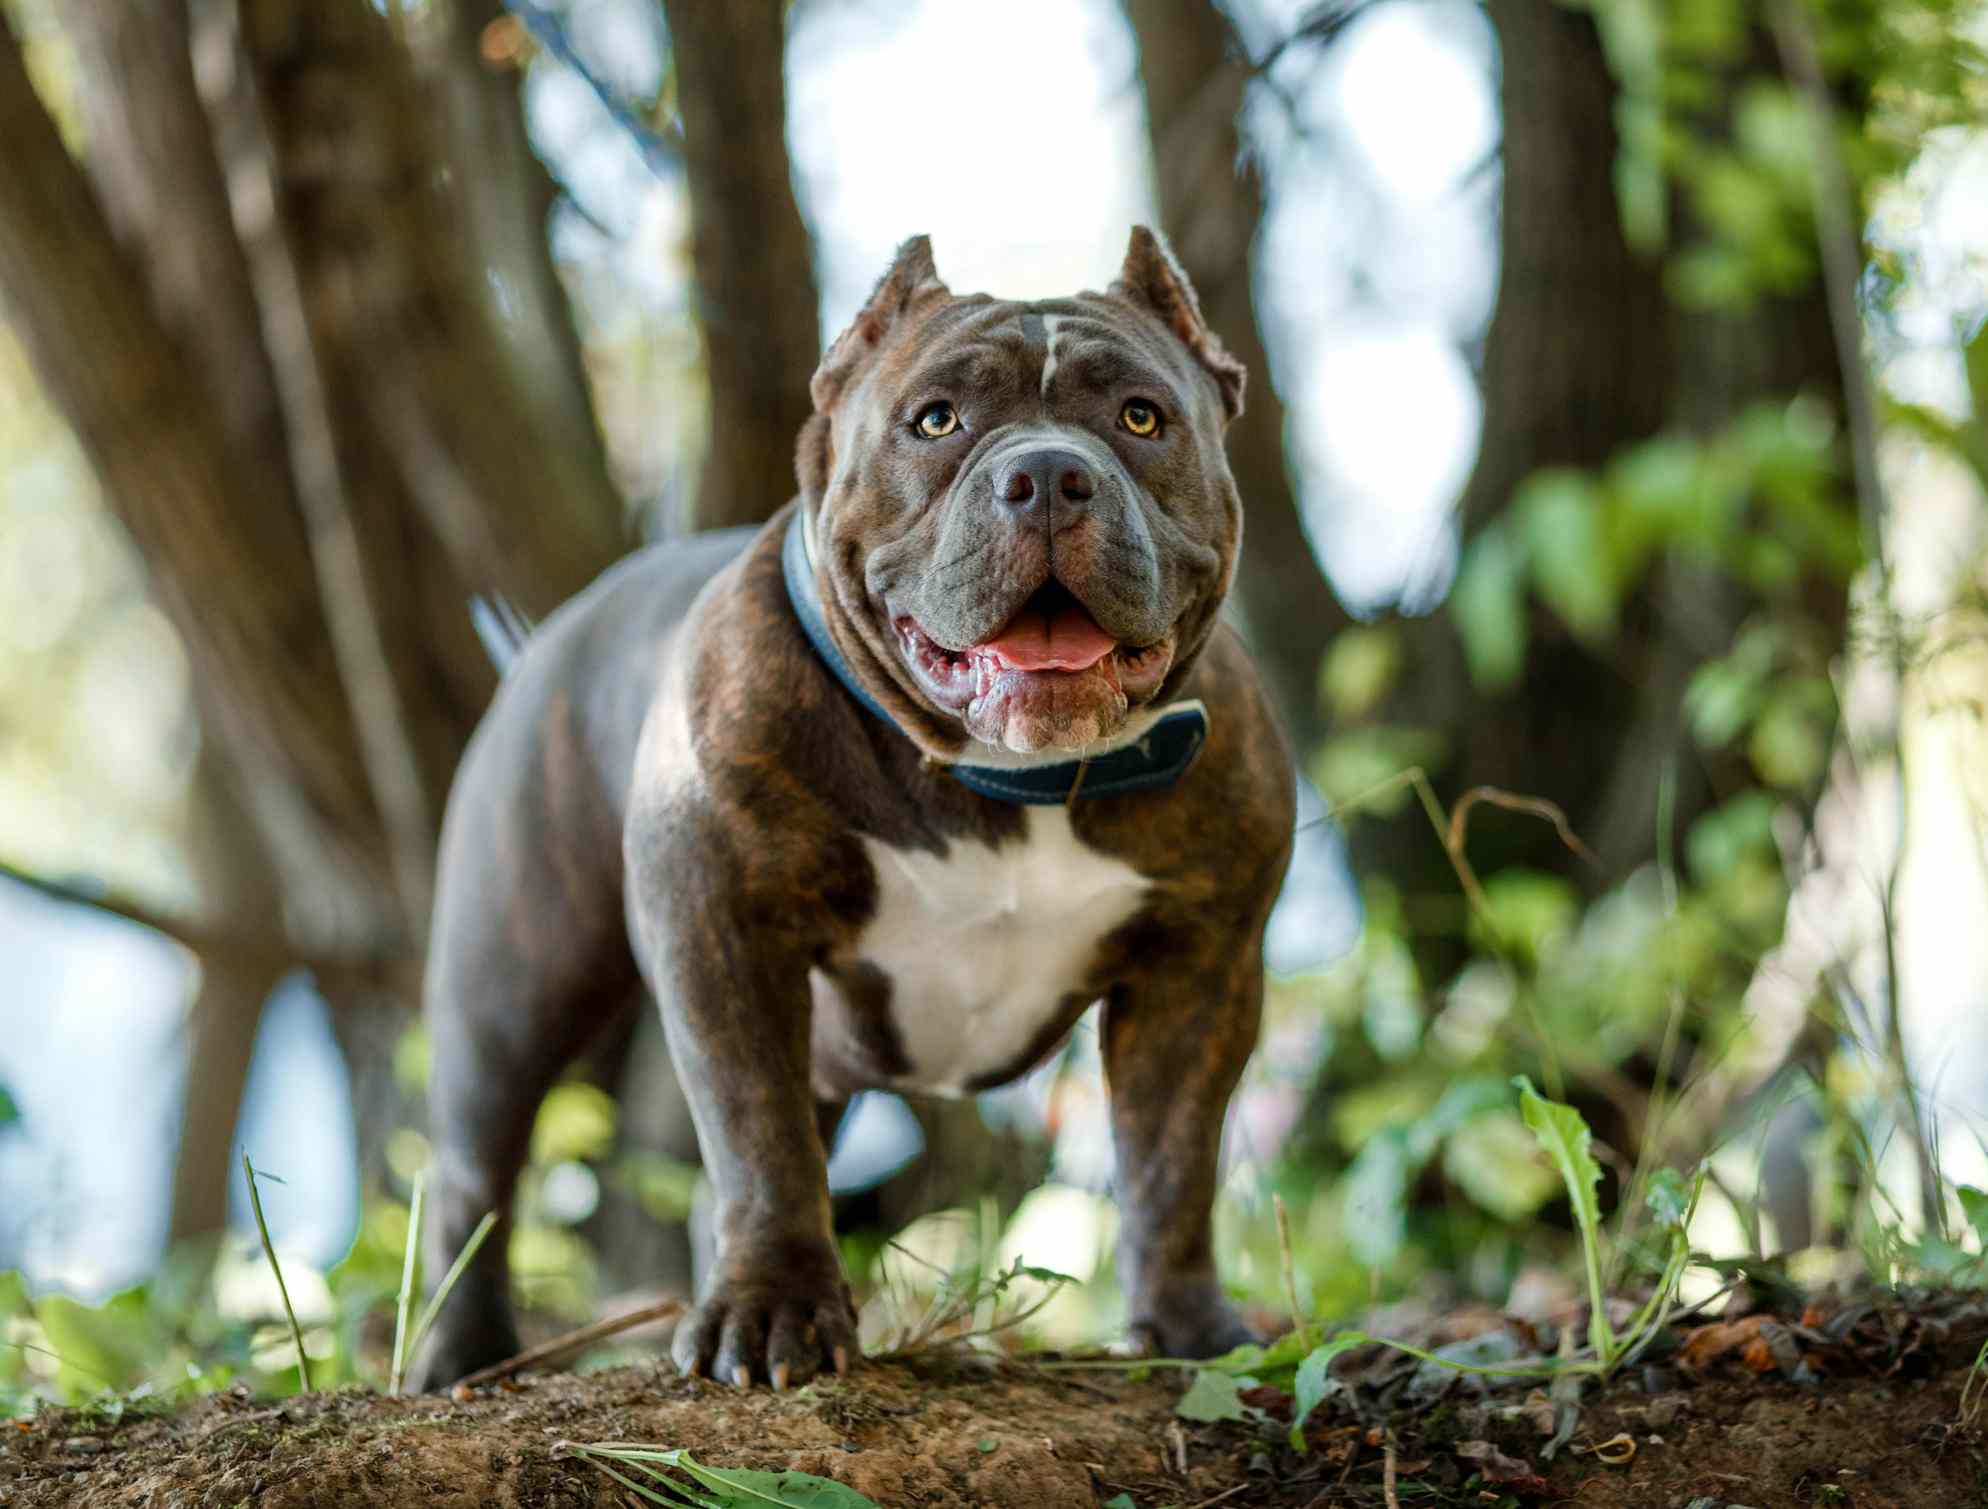 American Bully standing in a forest